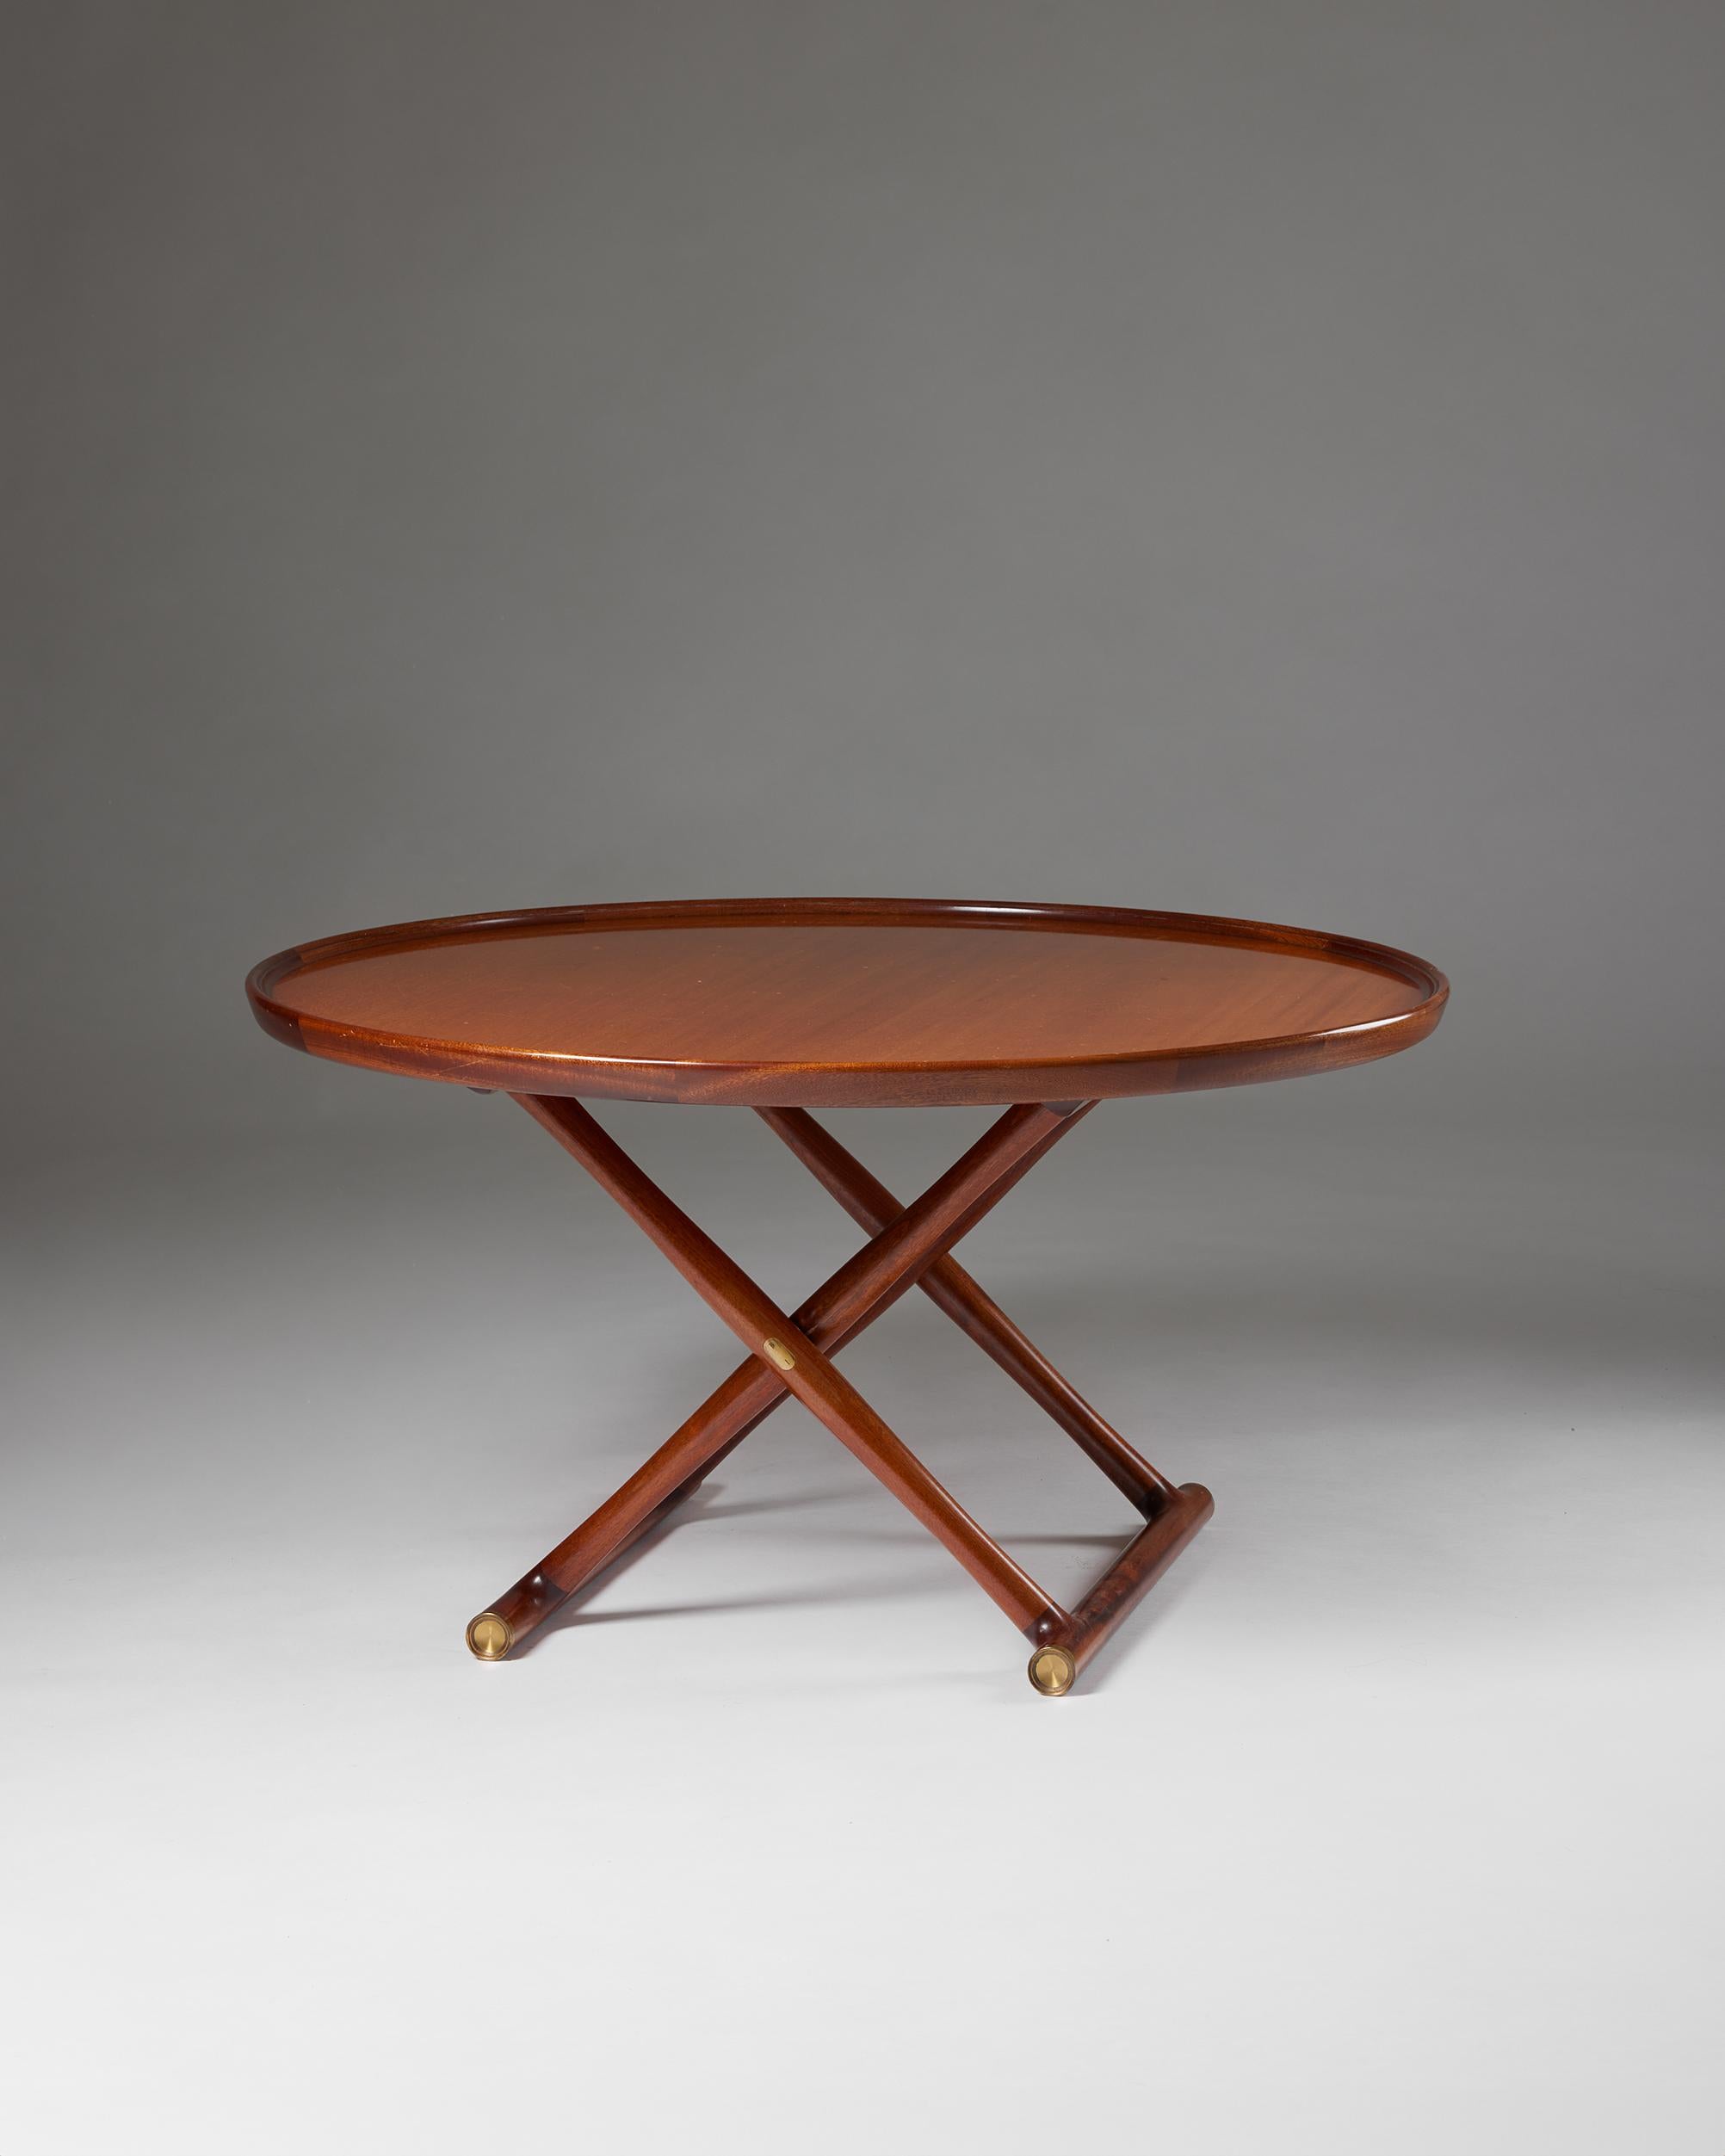 Occasional table ‘The Egyptian table’, designed by Mogens Lassen for Rud Rasmussen,
Denmark, 1935.

Mahogany, foldable frame and top with raised edge, brass fittings.

With this occasional table model, Mogens Lassen created an icon of Scandinavian